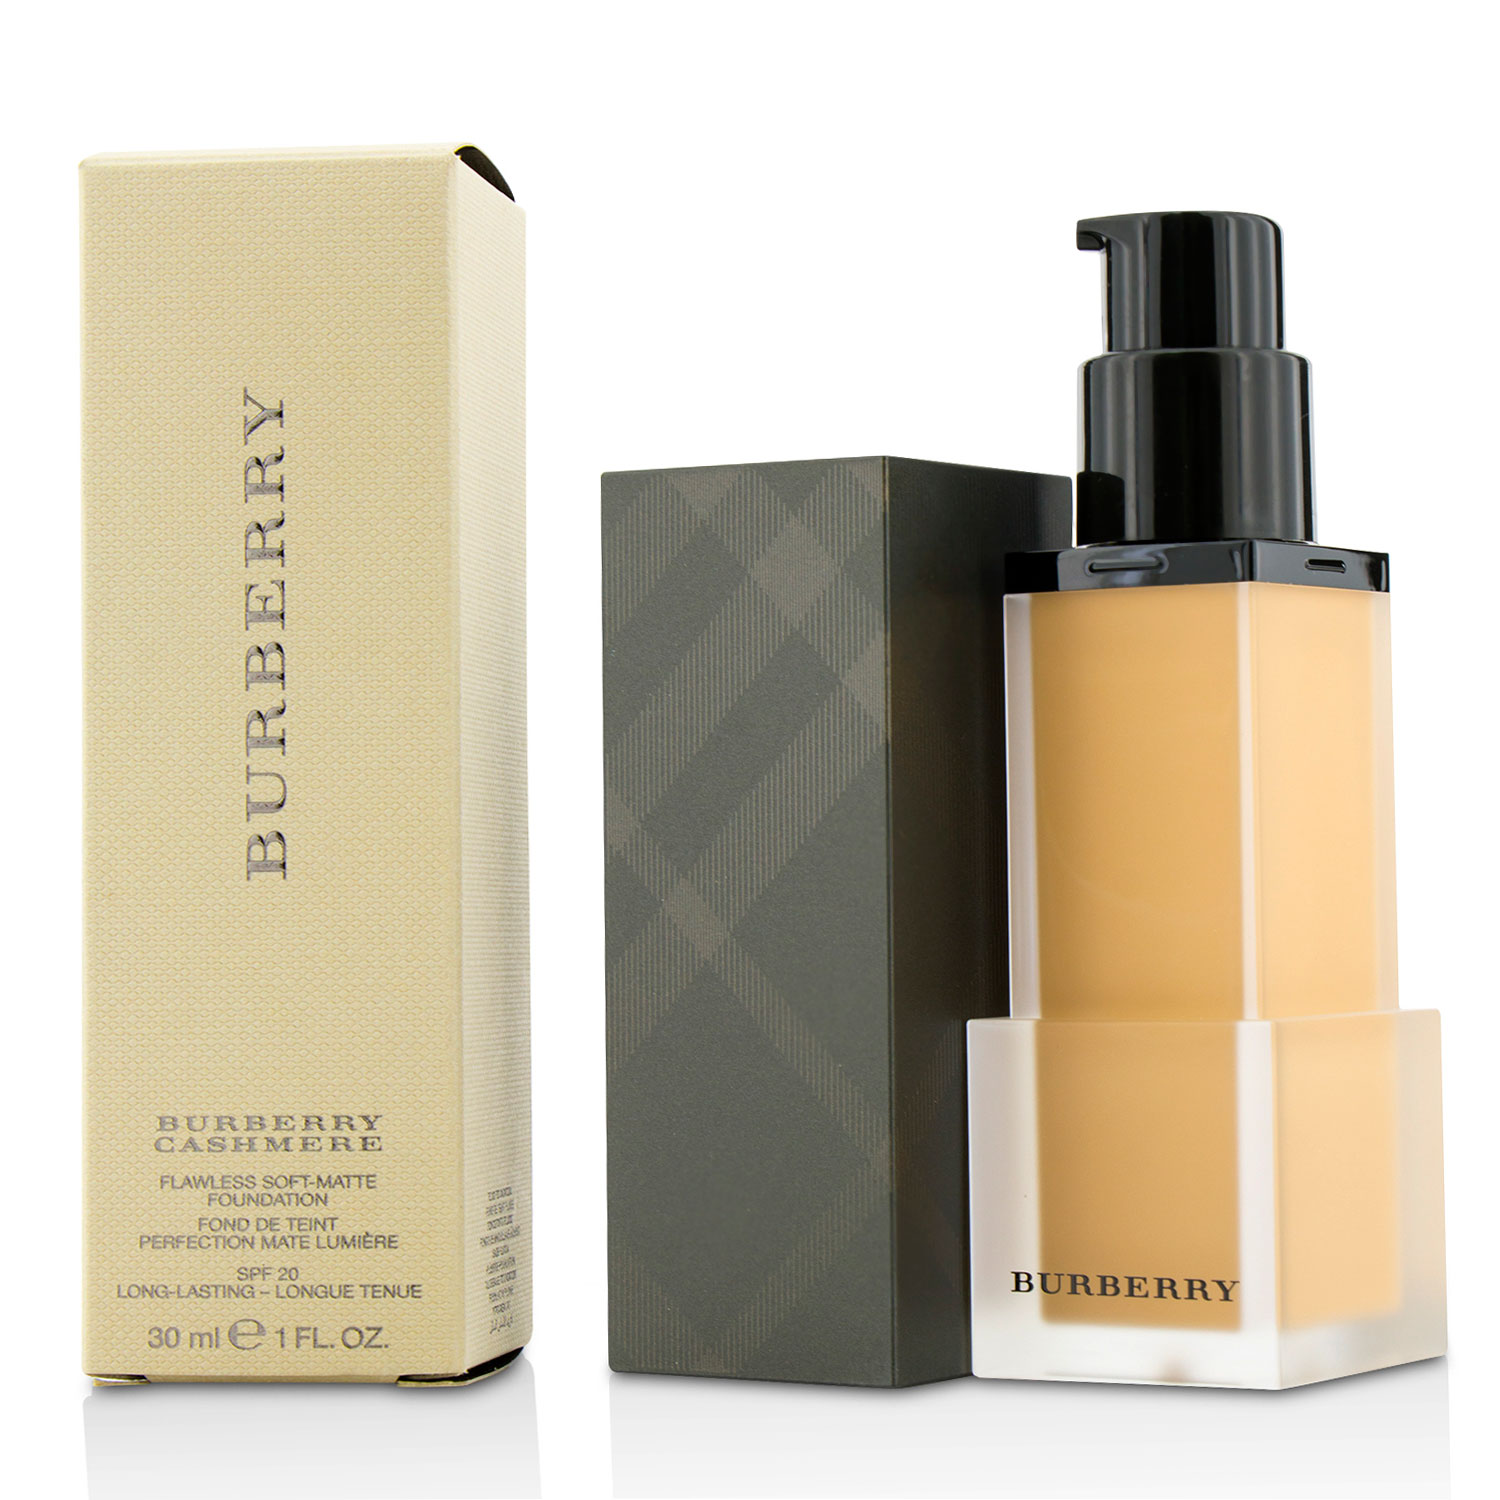 Burberry Cashmere Flawless Soft Matte Foundation SPF 20 - # No. 34 Warm Nude Burberry Image